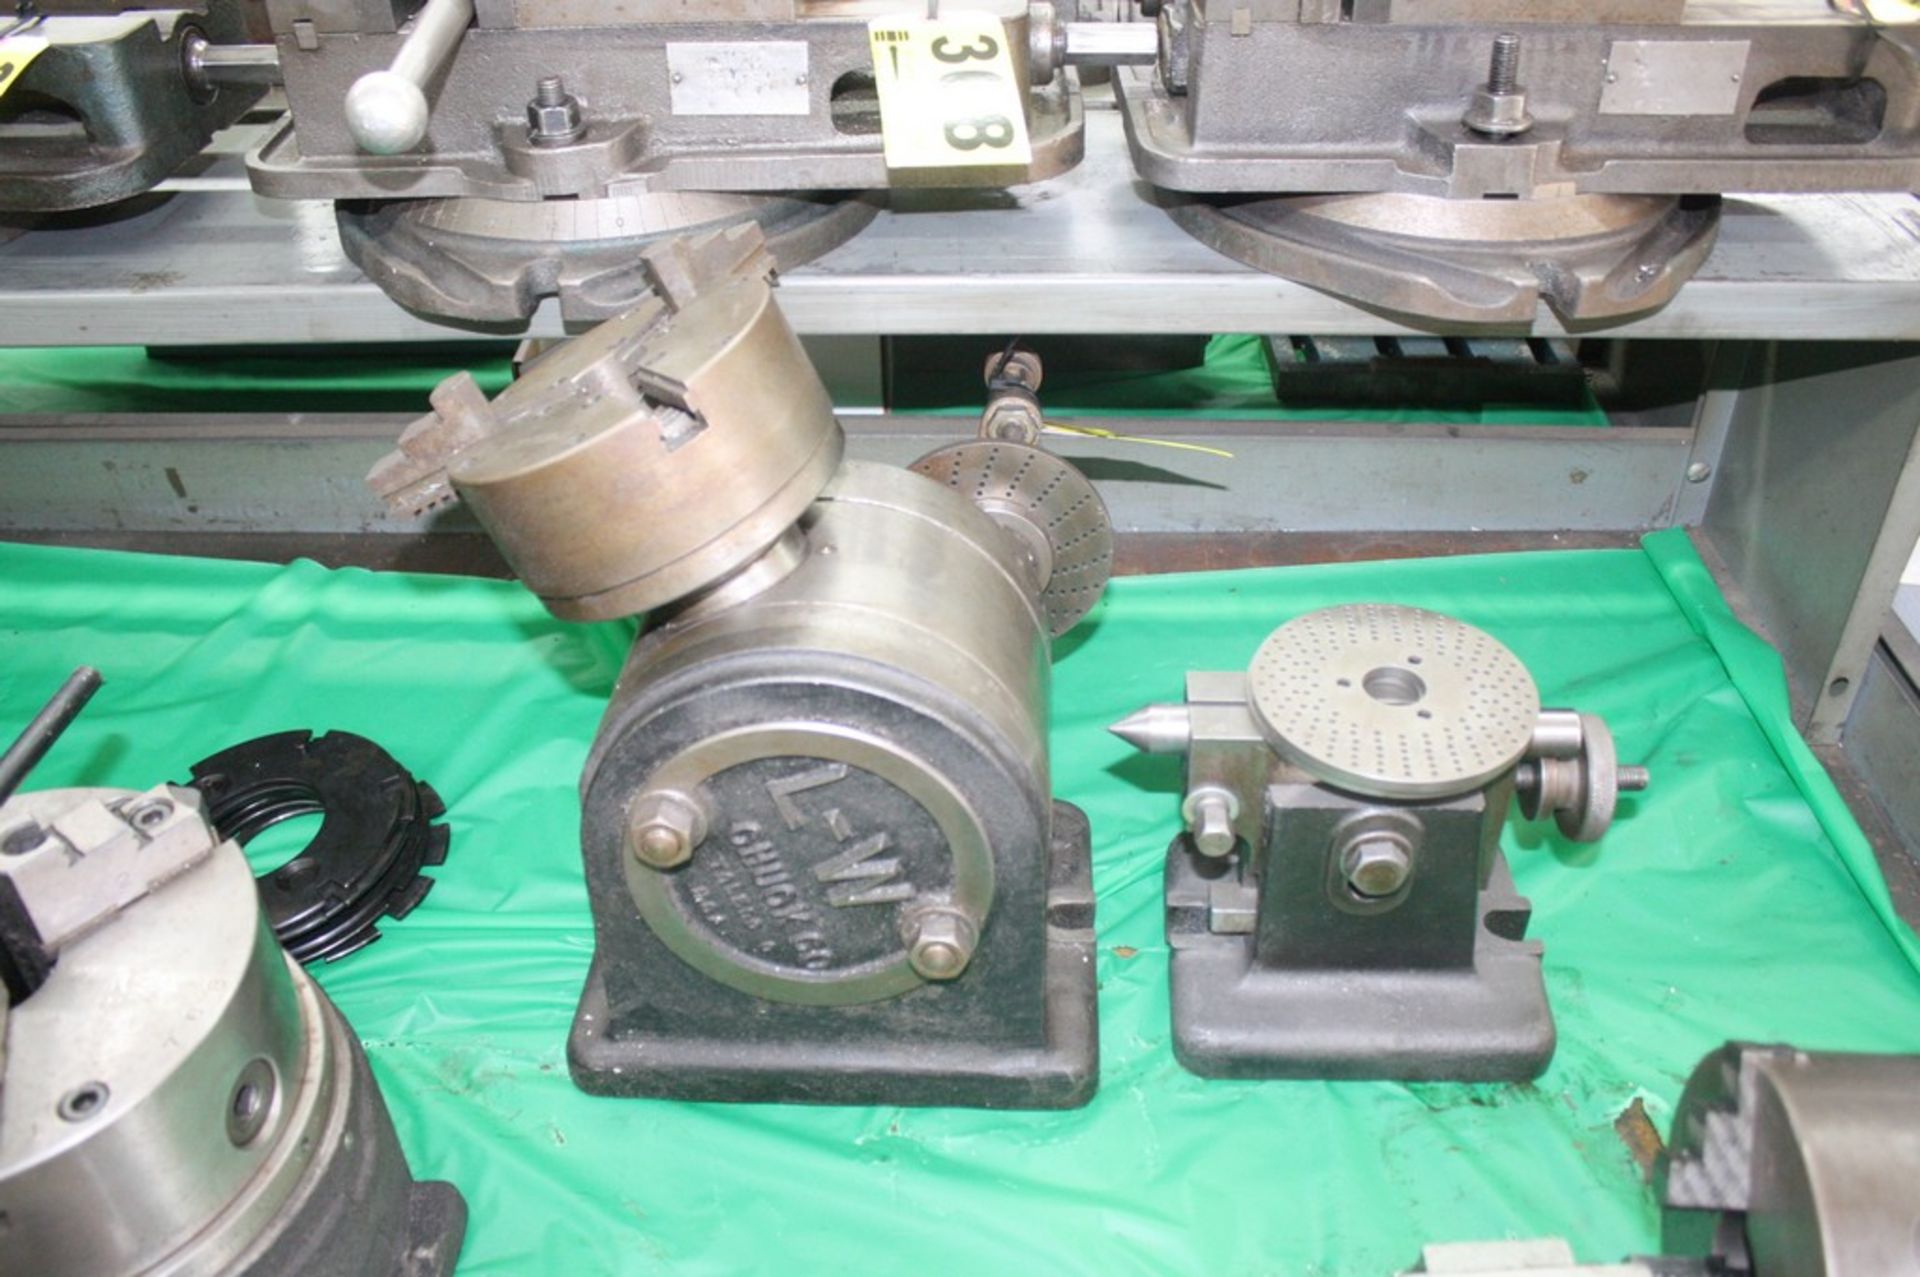 L-W CHUCK CO. DIVIDING HEAD AND TAIL STOCK